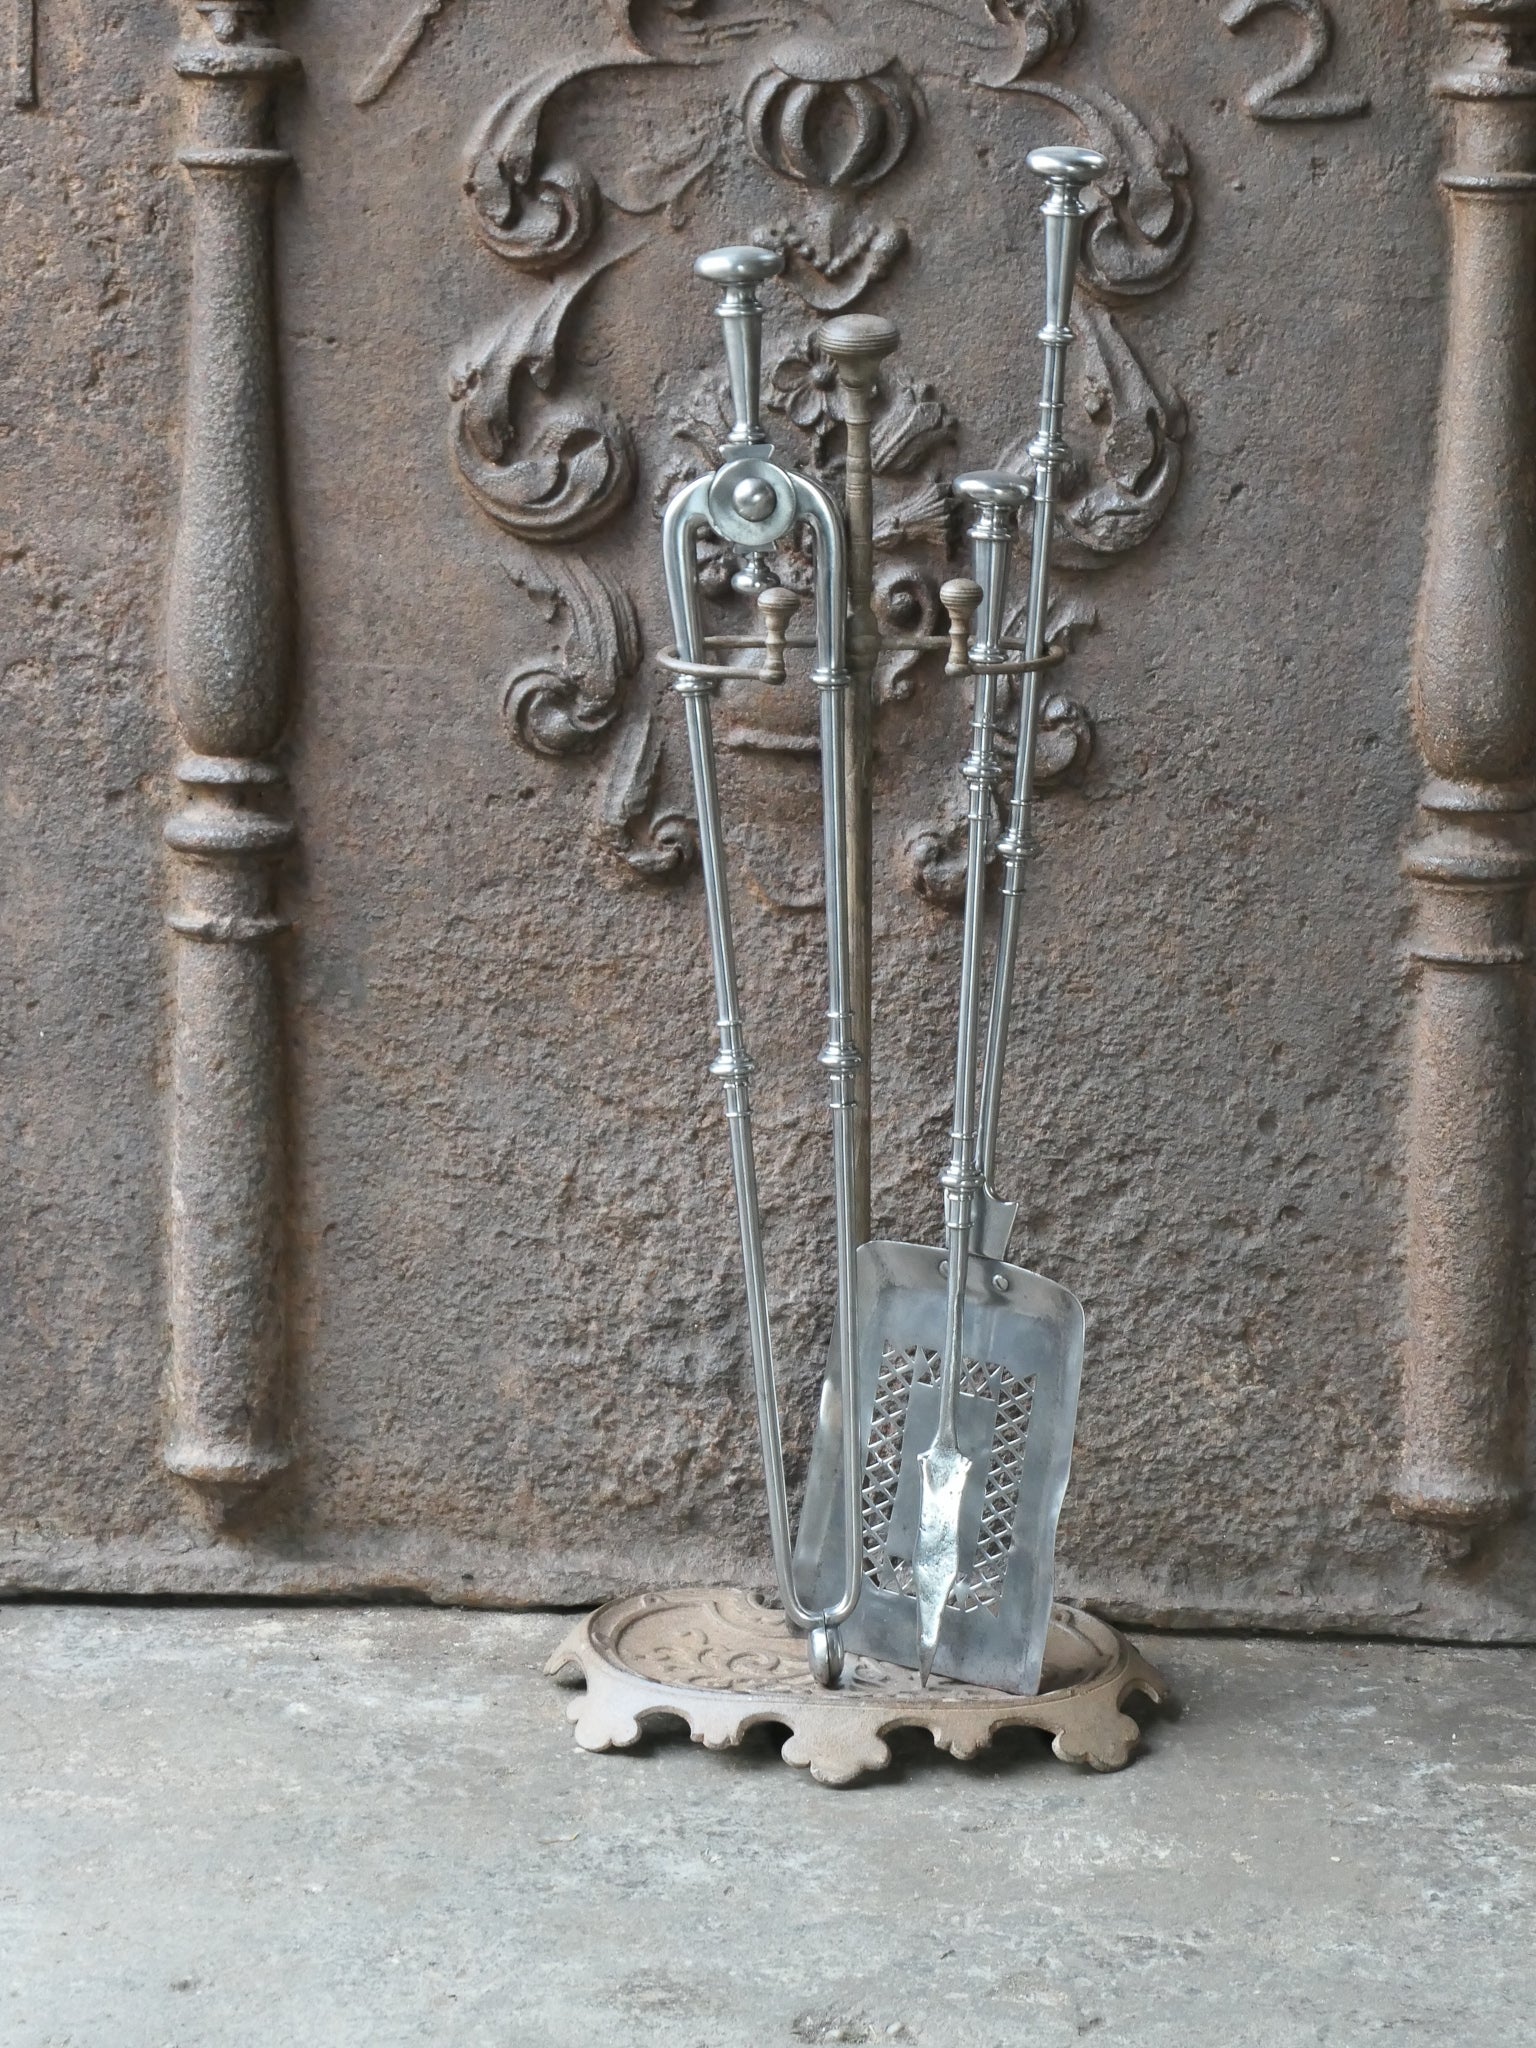 Beautiful 18th - 19th century English Georgian fireplace tool set. The tool set consists of tongs, shovel, poker and stand. The stand is made of cast iron and the tools are made of polished steel. The set is in a good condition and fit for use in